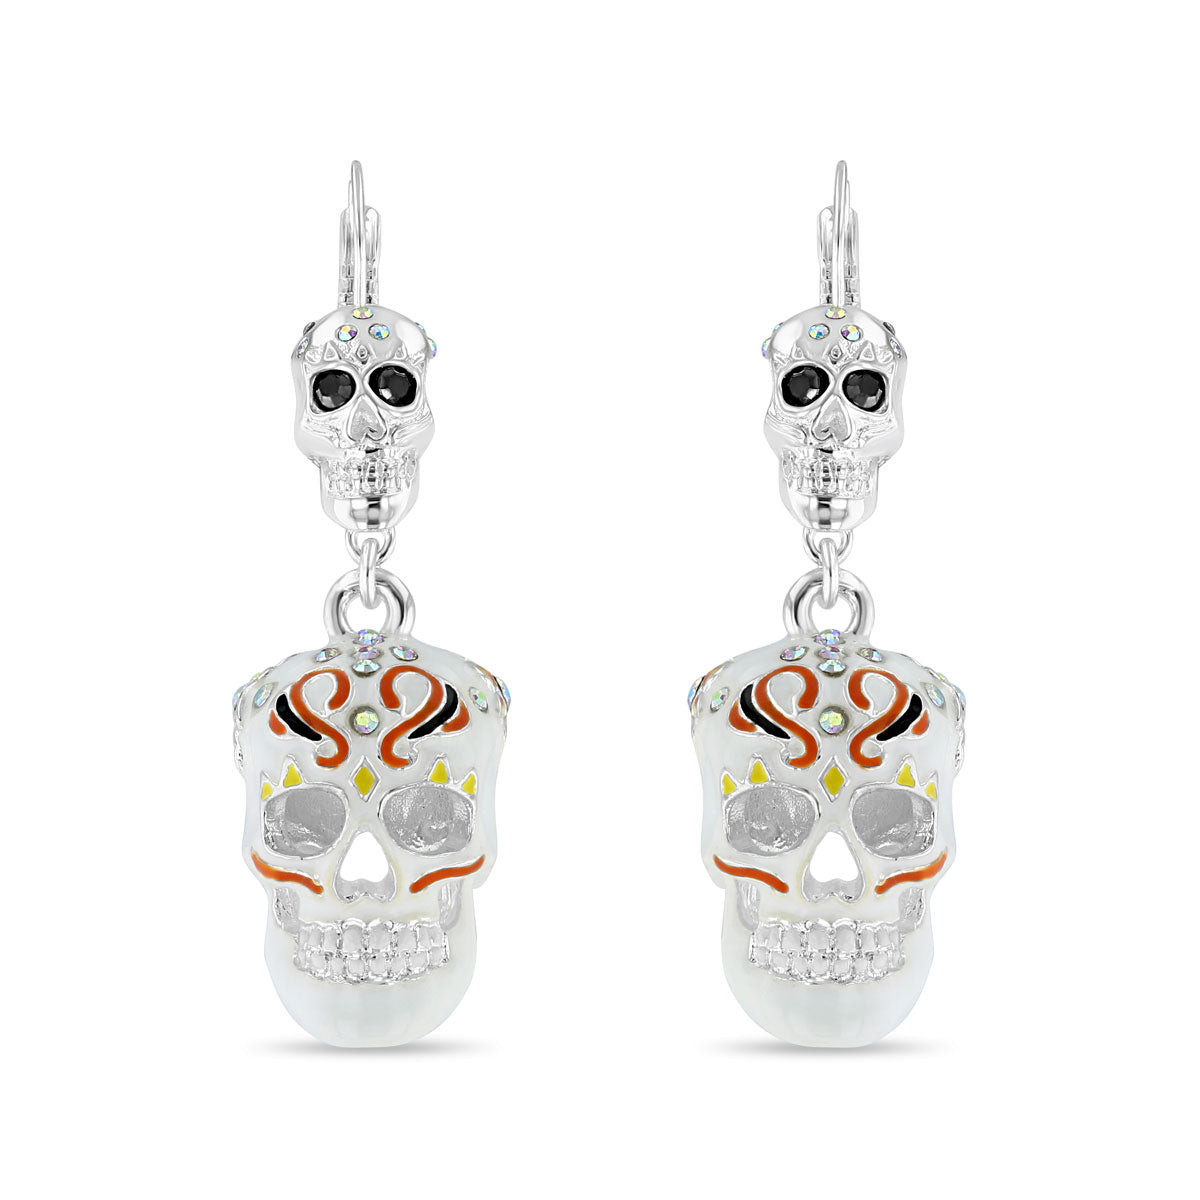 Sparkling Sugar Skull Leverback Earrings-Ritzy Couture DeLuxe-Fine Silver Plated